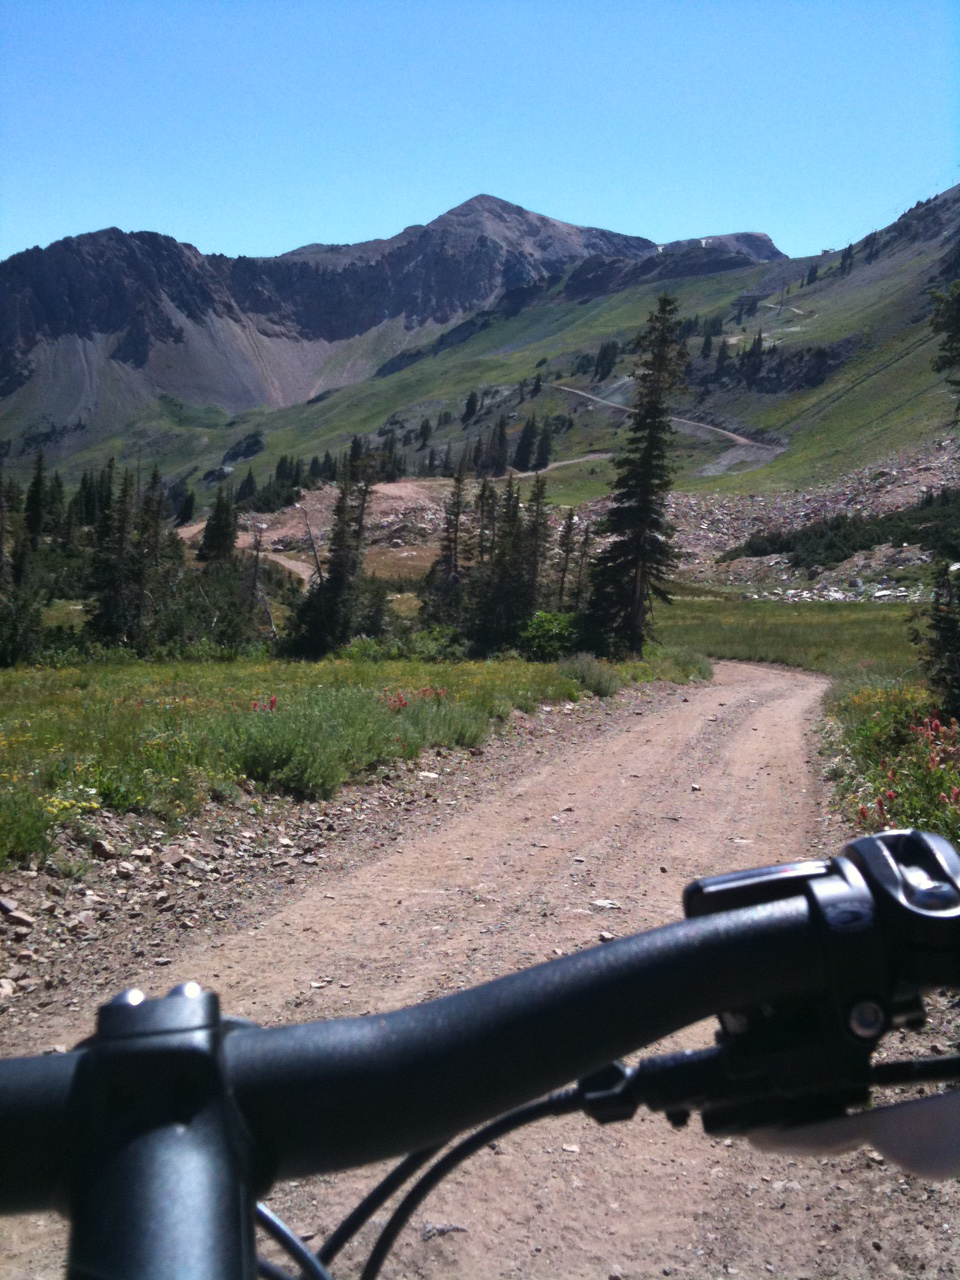 Mountain Biking in Alta in the Wasatch Cache National Forest. Photo by Dave Iltis